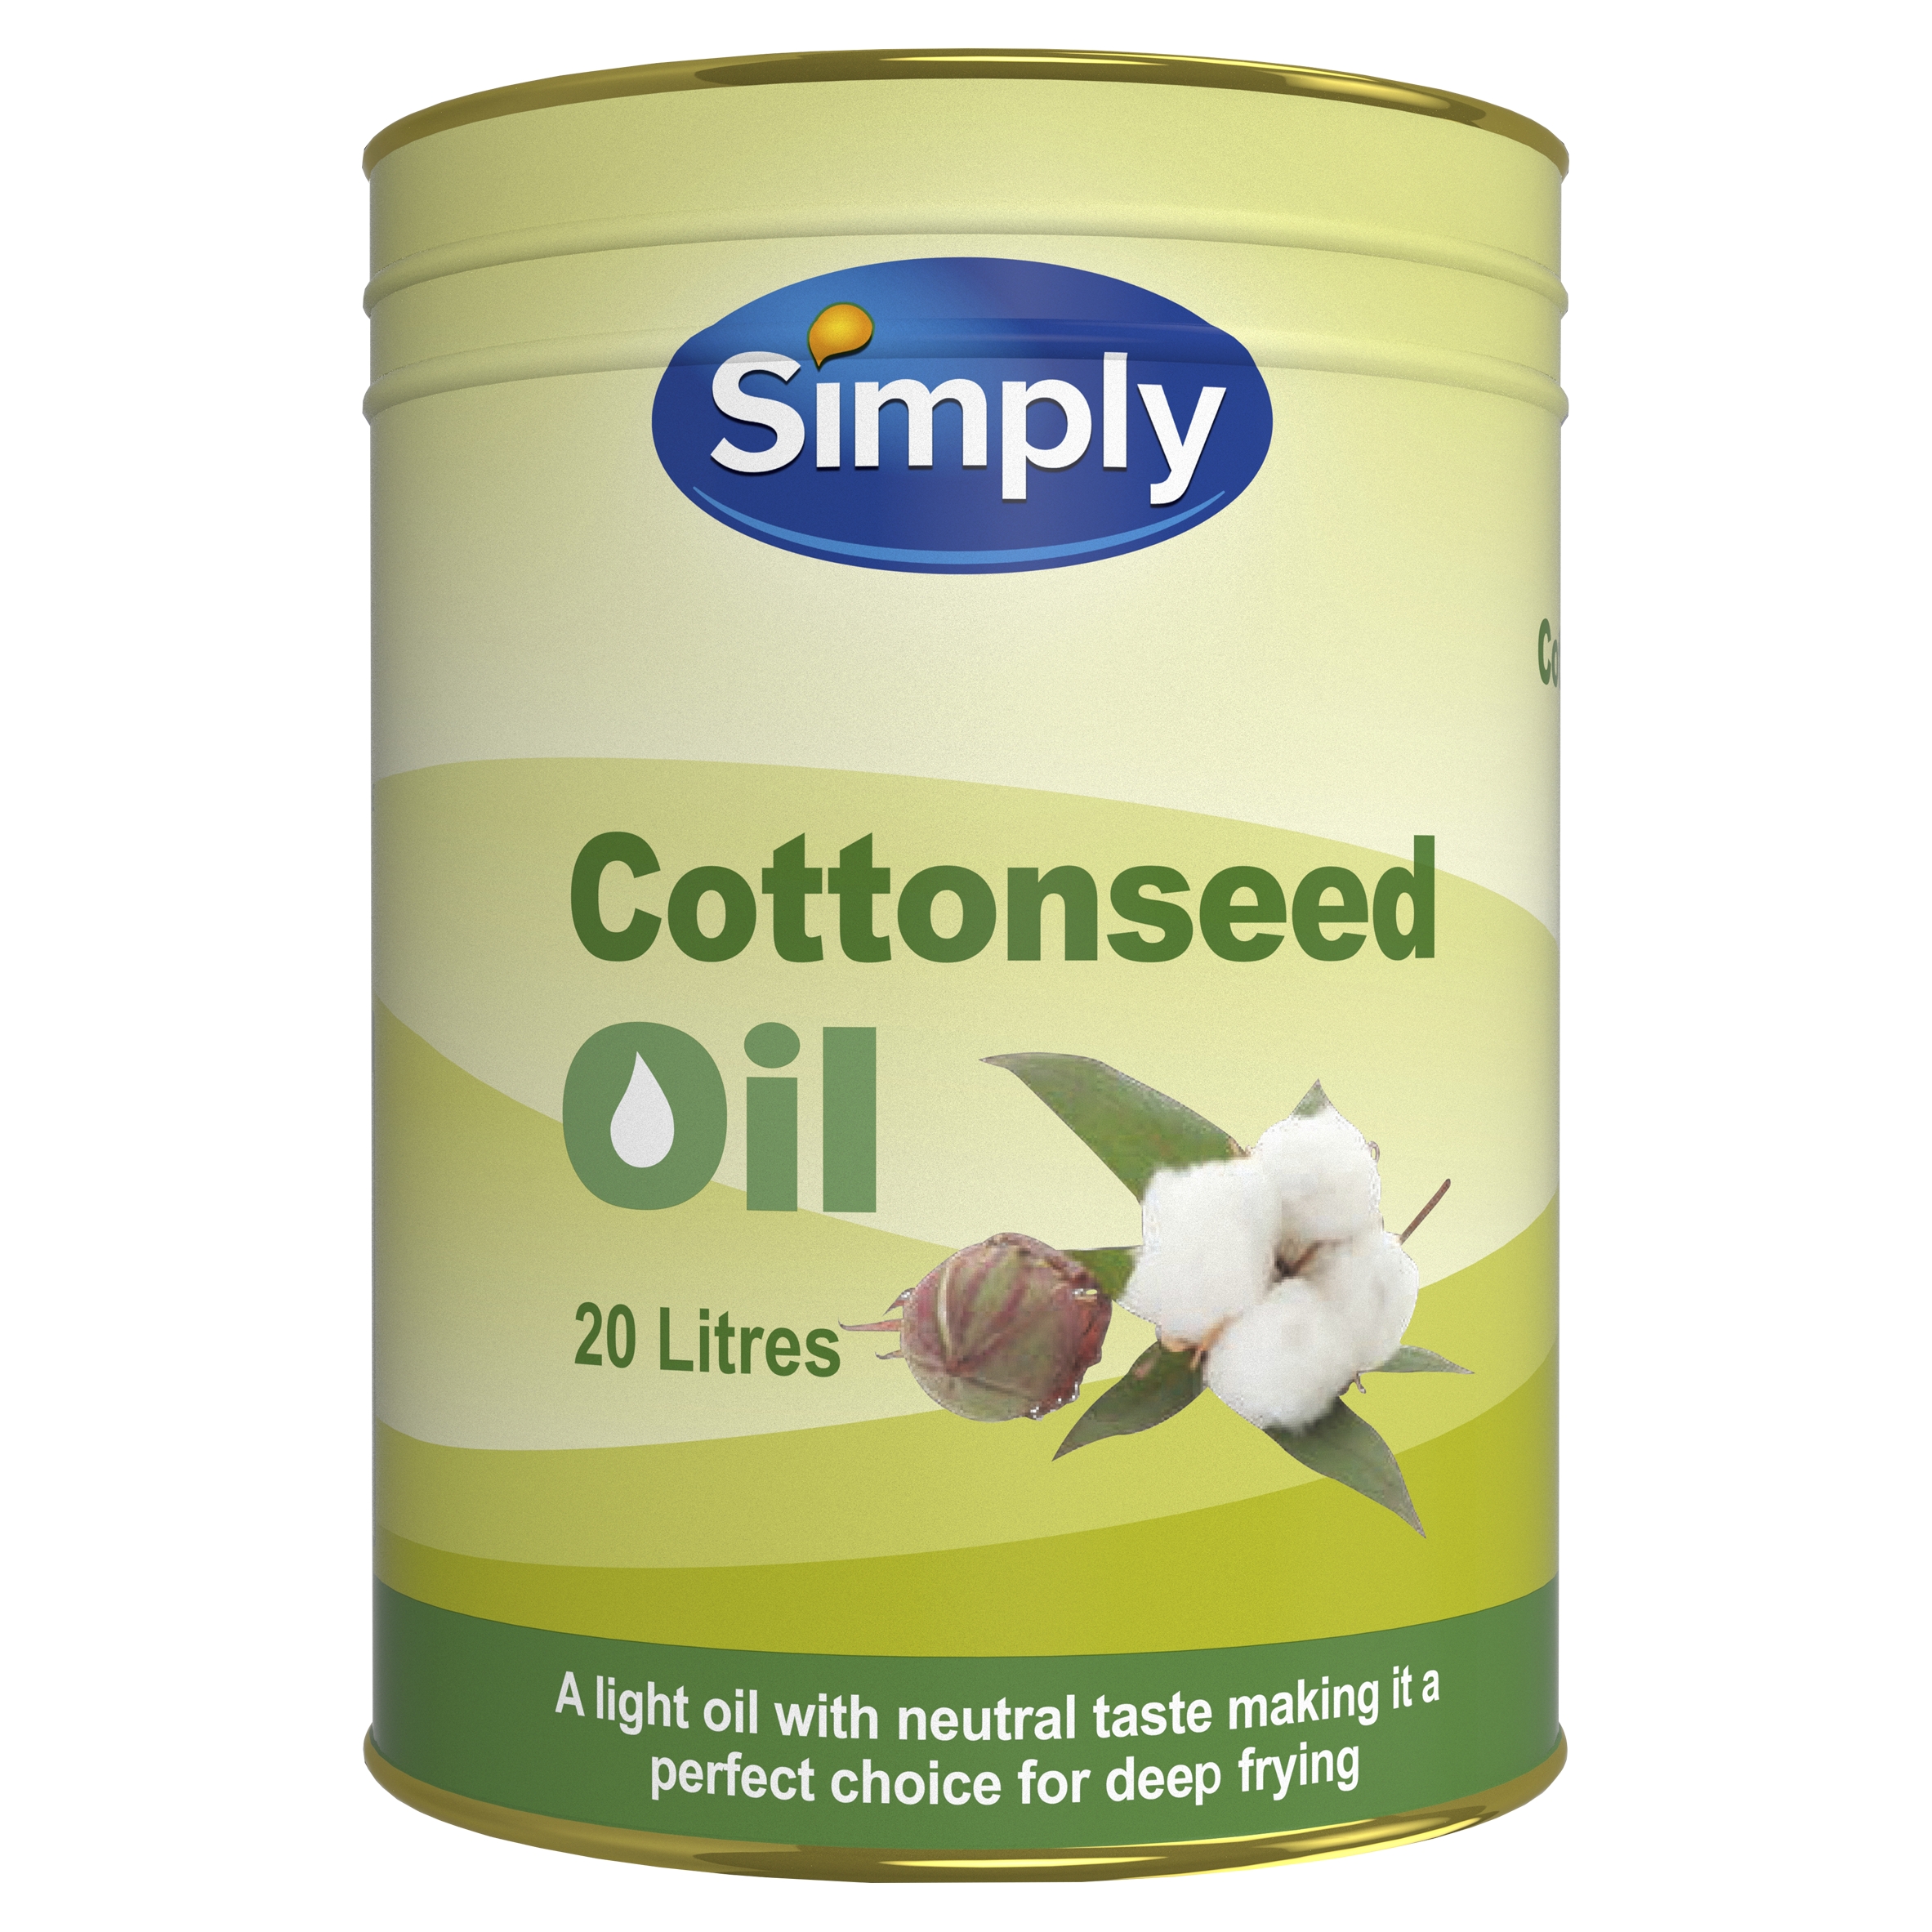 Simply Cottonseed Oil 20 Litres